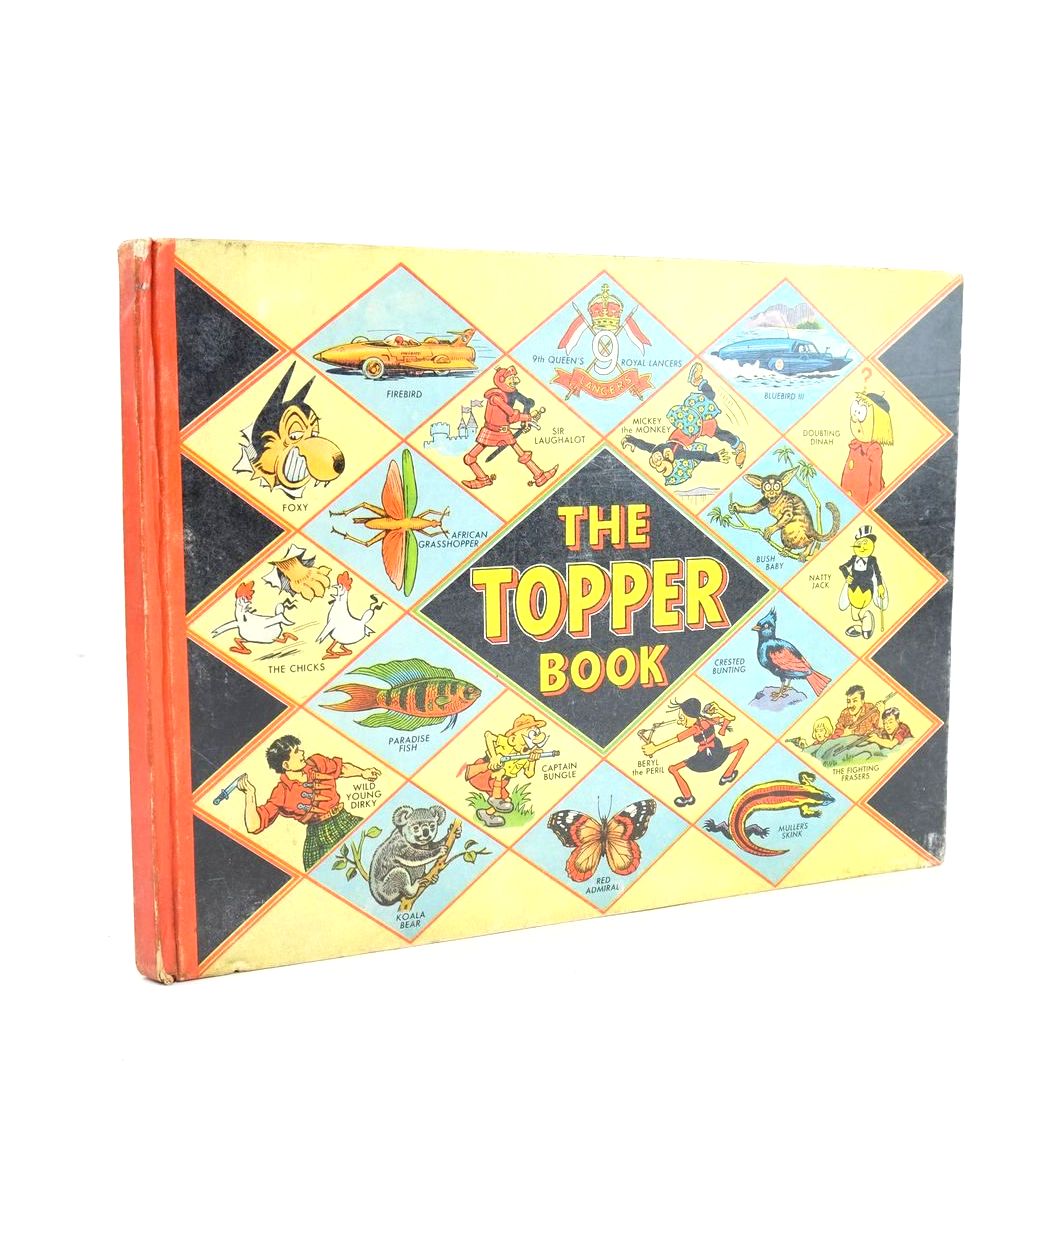 Photo of THE TOPPER BOOK 1958 published by D.C. Thomson &amp; Co Ltd., John Leng (STOCK CODE: 1325837)  for sale by Stella & Rose's Books